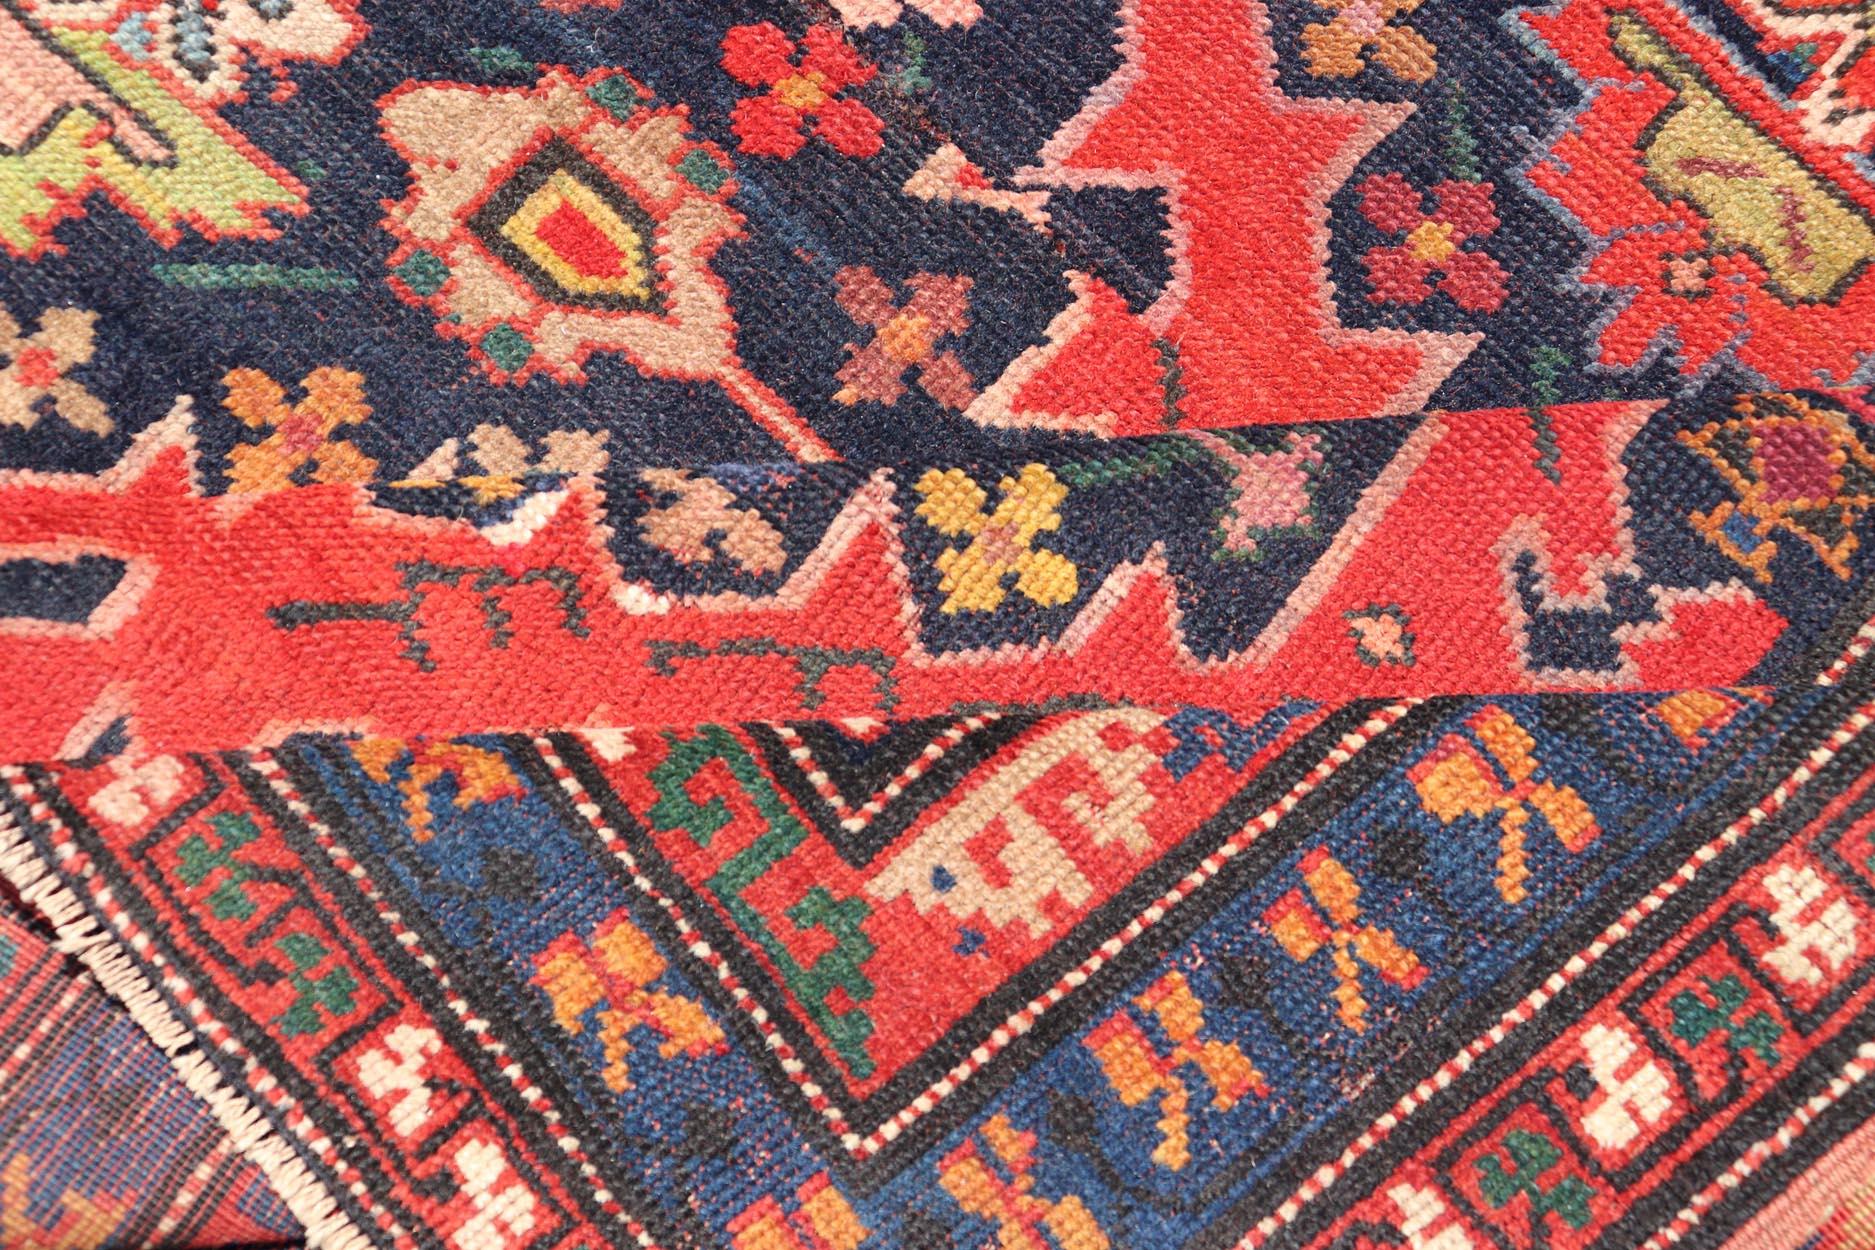 Antique Caucasian Kazak Rug with Sub-Geometric Medallions Design in Red and Blue For Sale 6